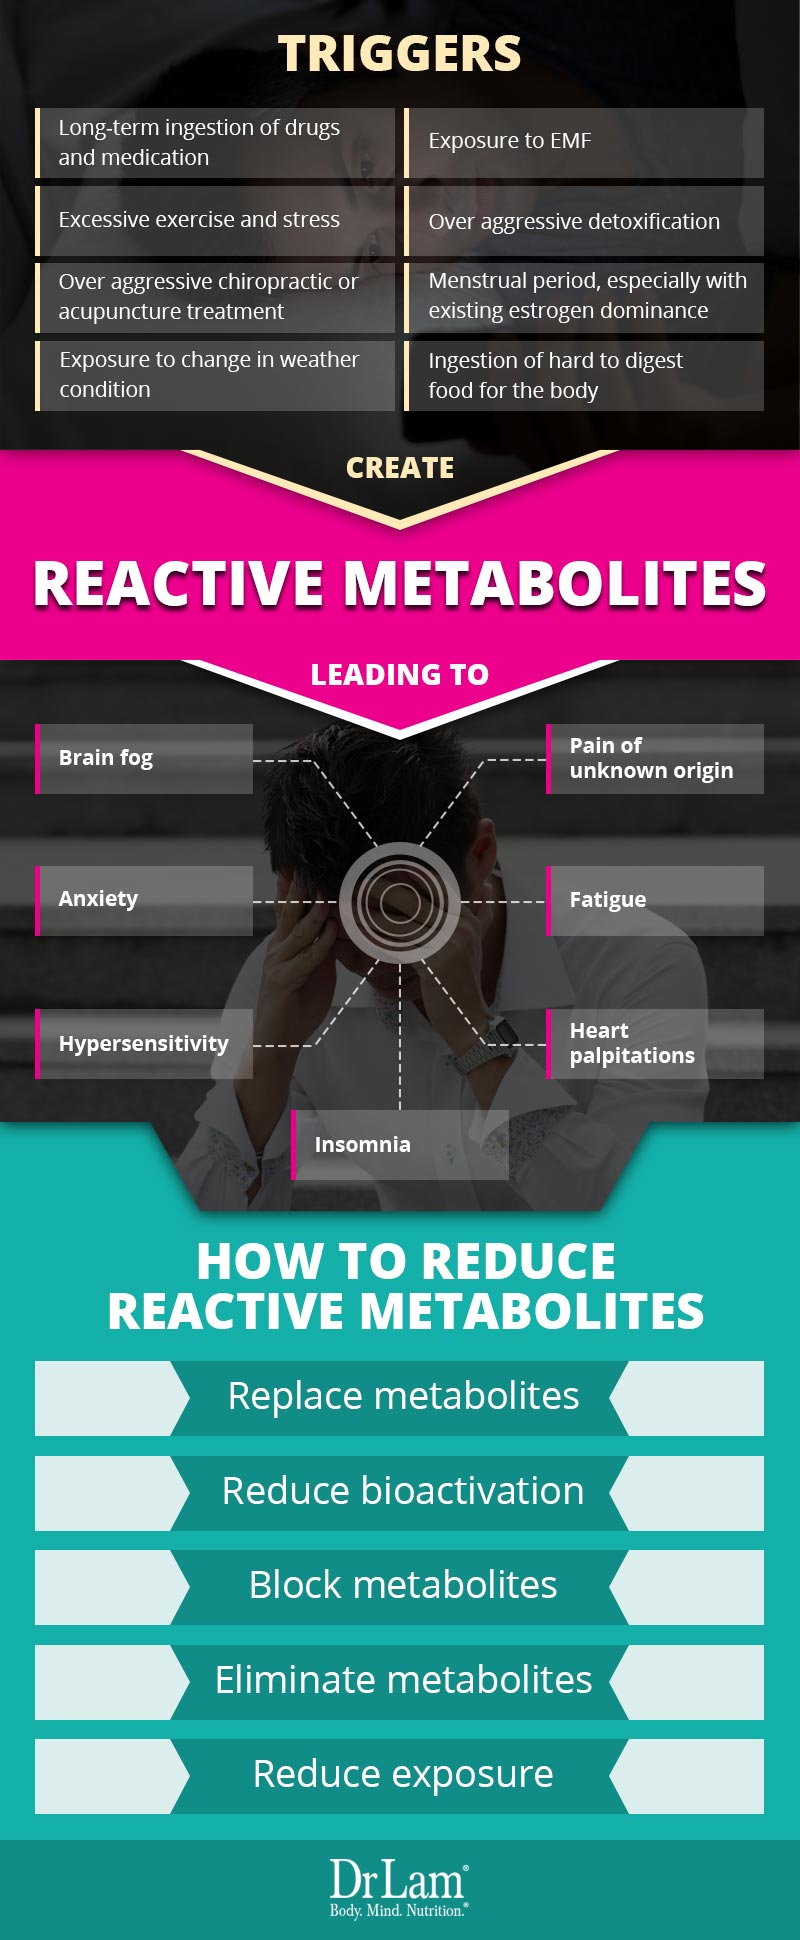 Check out this easy to understand infographic about reactive metabolites, the triggers, and how to reduce them.